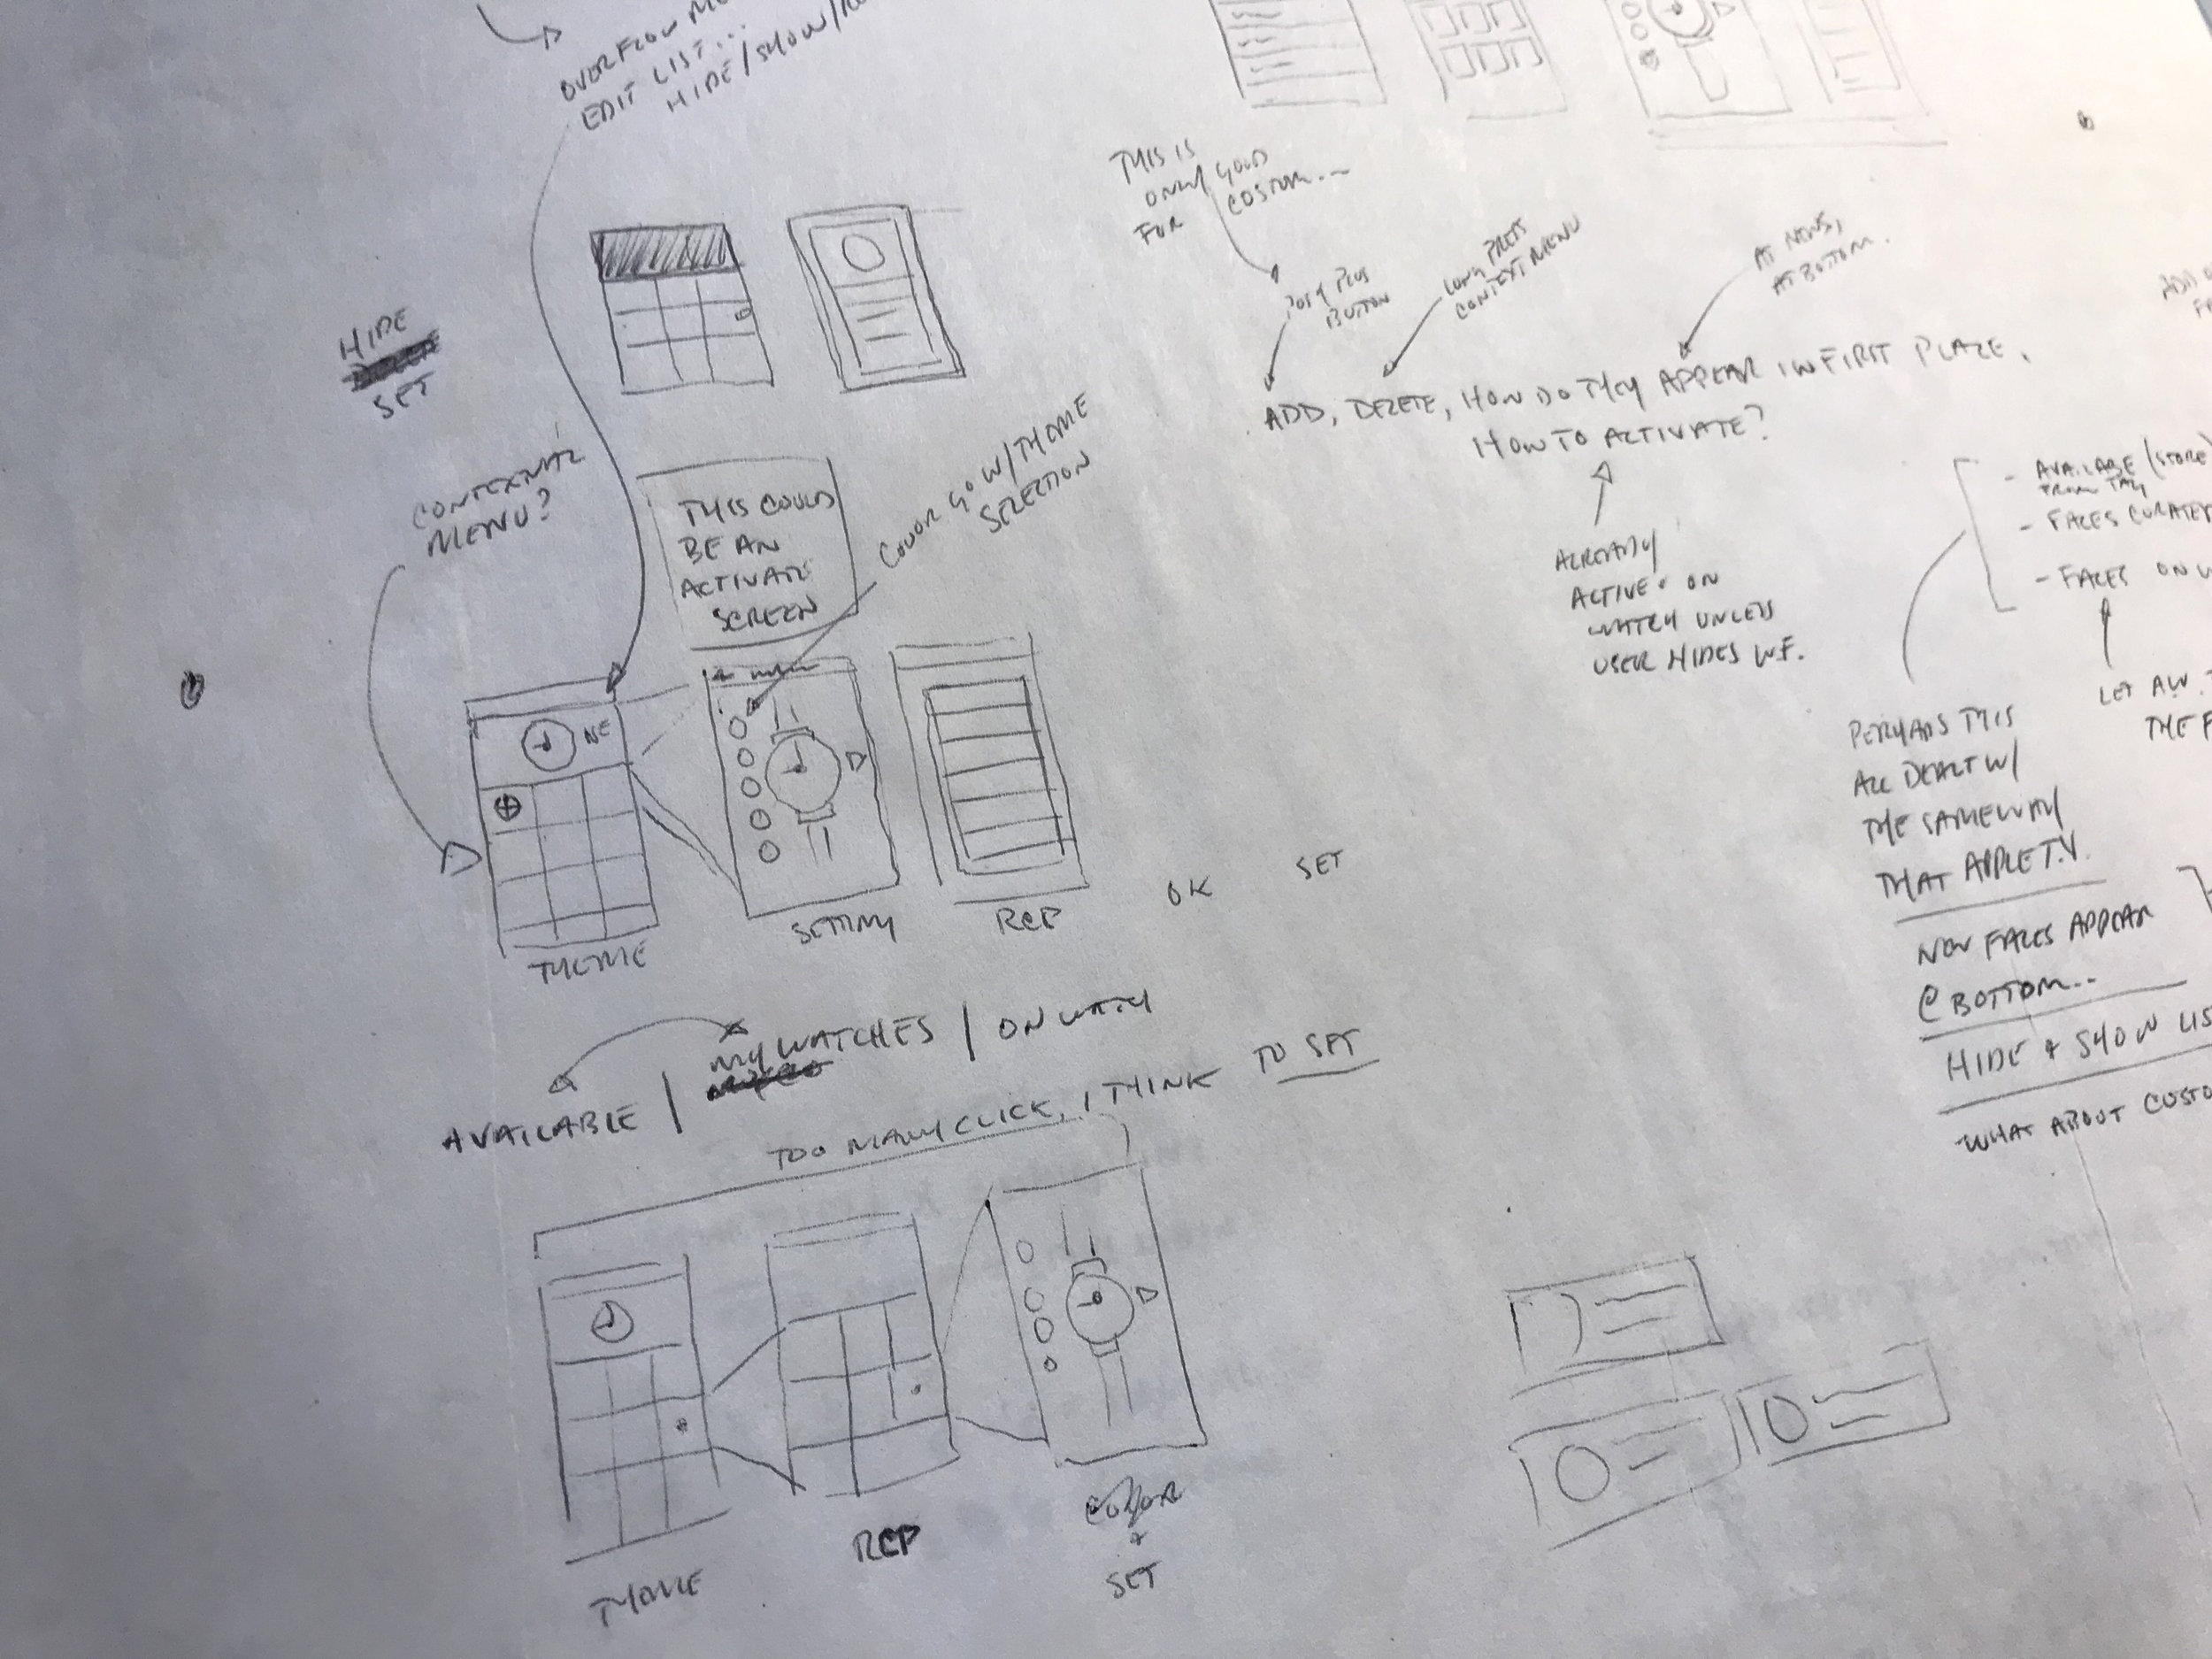 Early sketches for the mobile app